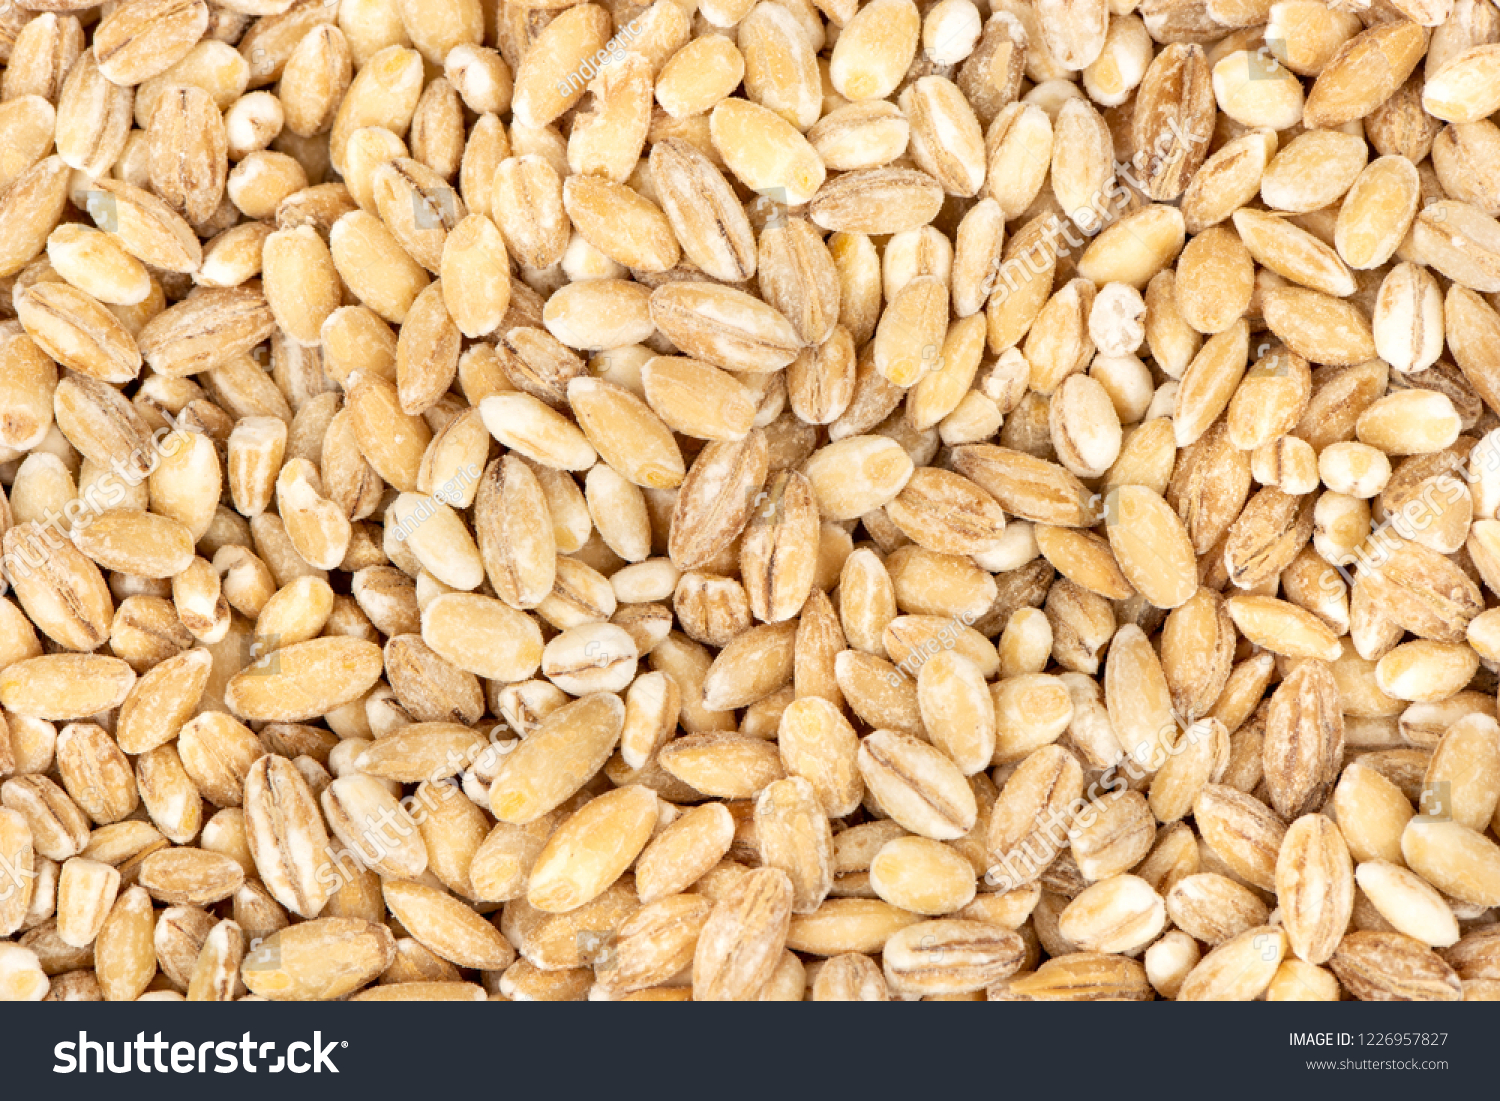 Background from scattered raw pearl barley closeup #1226957827